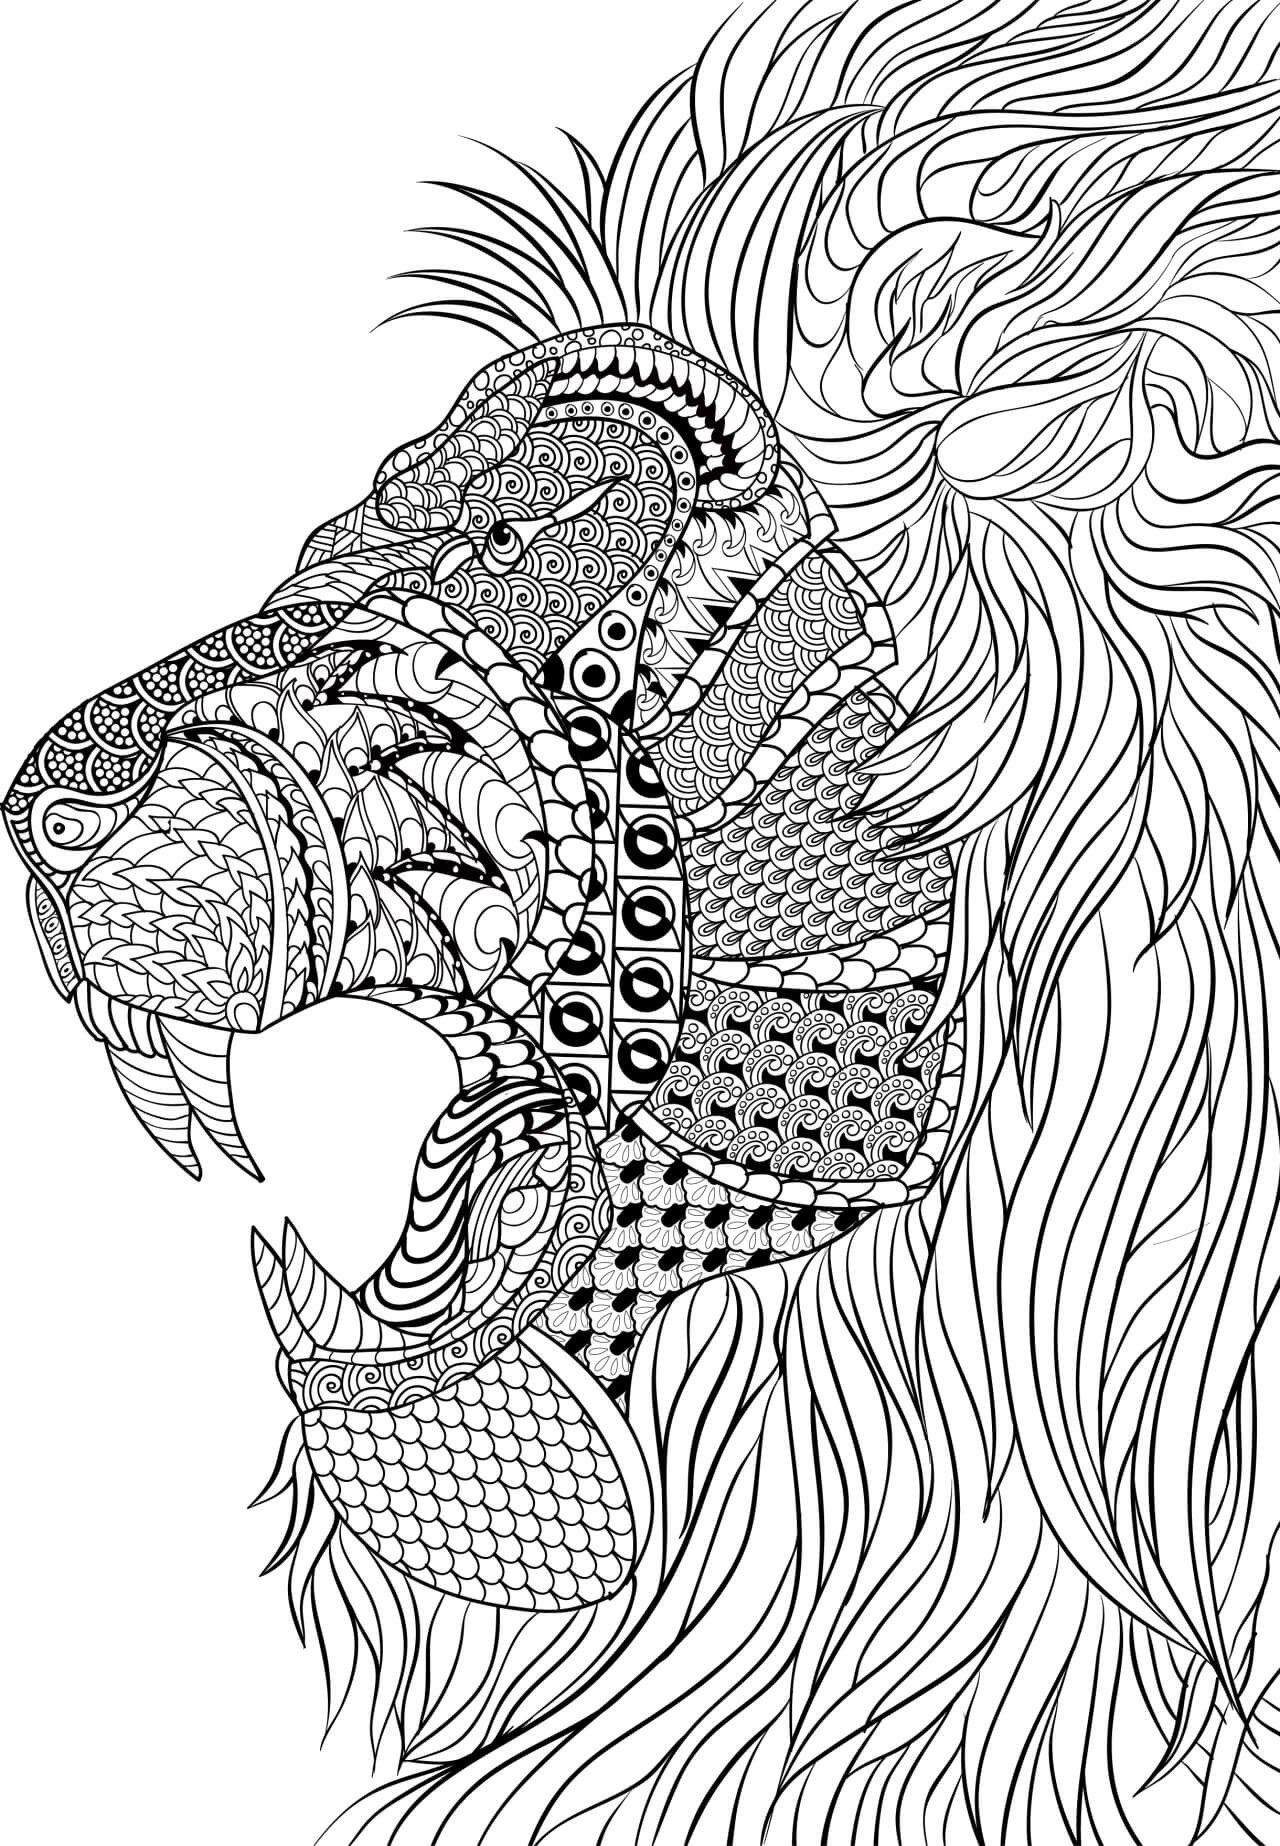 Animals Coloring Pages For Adults
 Coloring Pages For Adults Difficult Animals 4